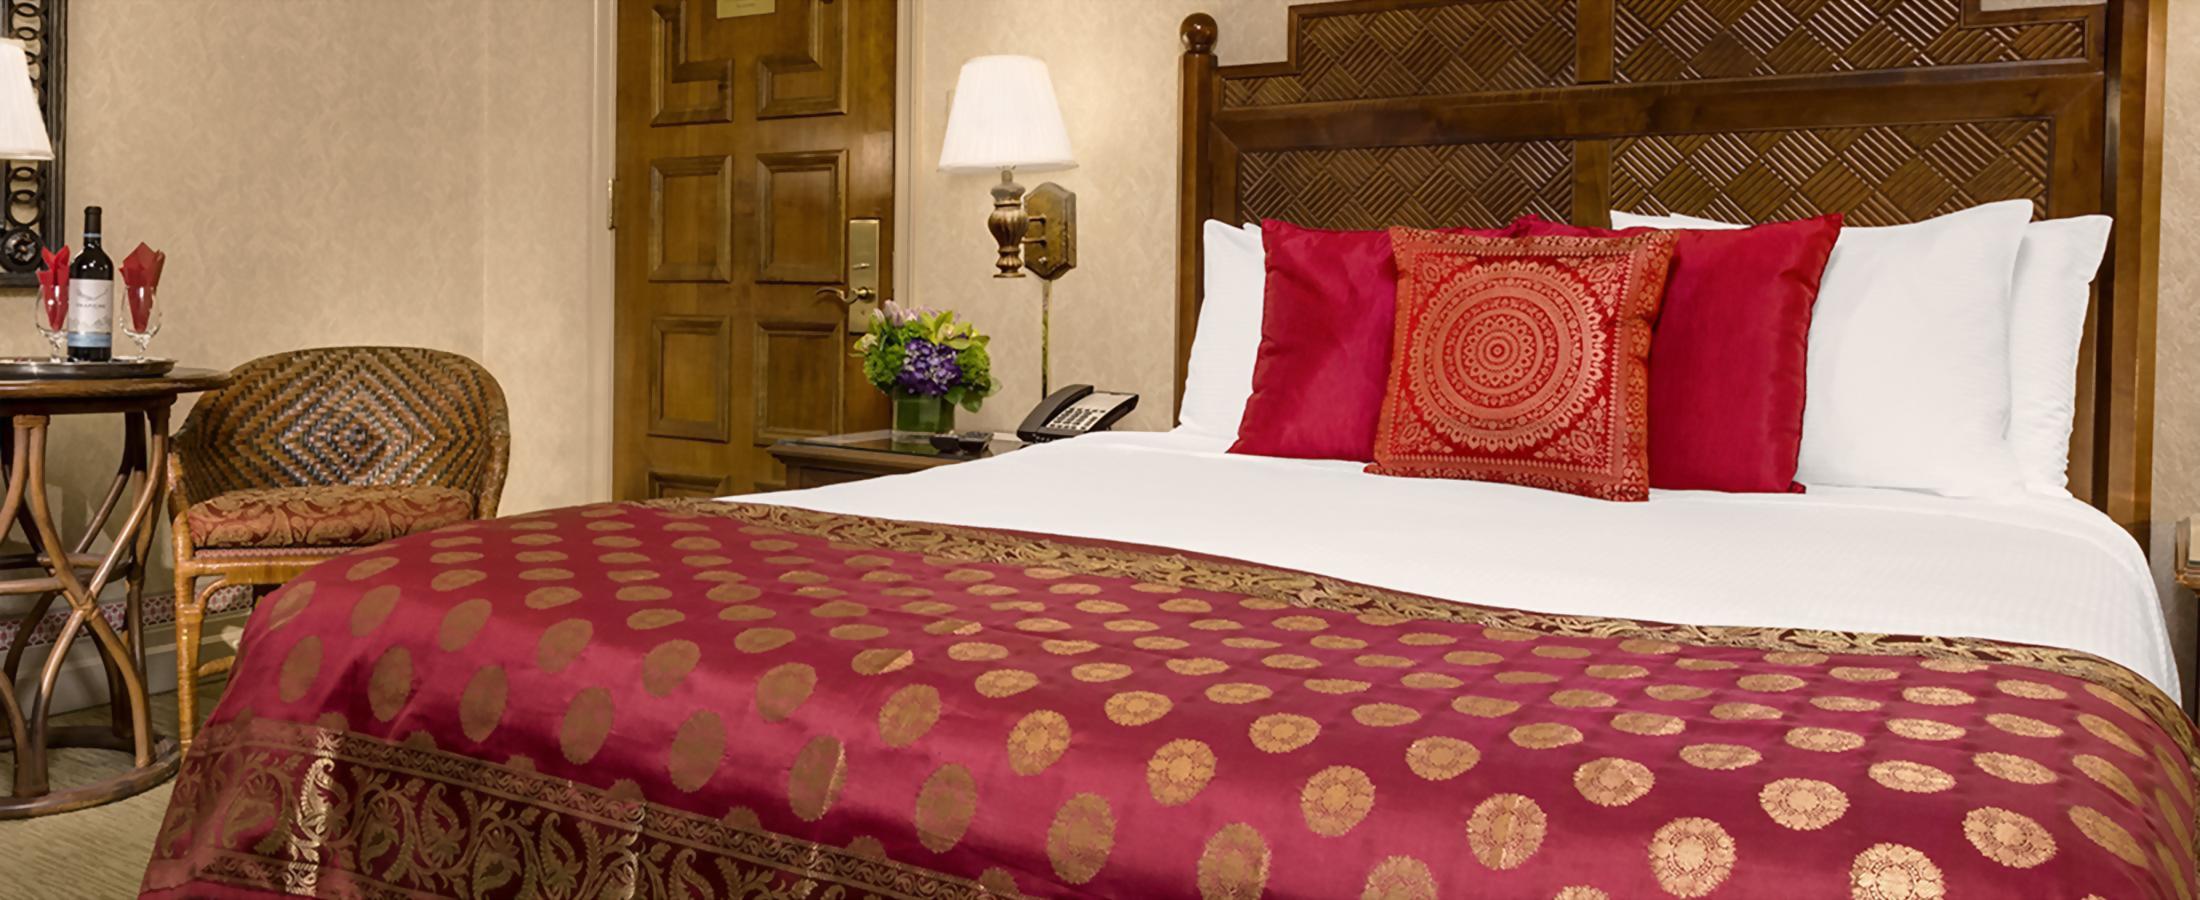 A queen size bed and bistro table in the Deluxe Queen room.